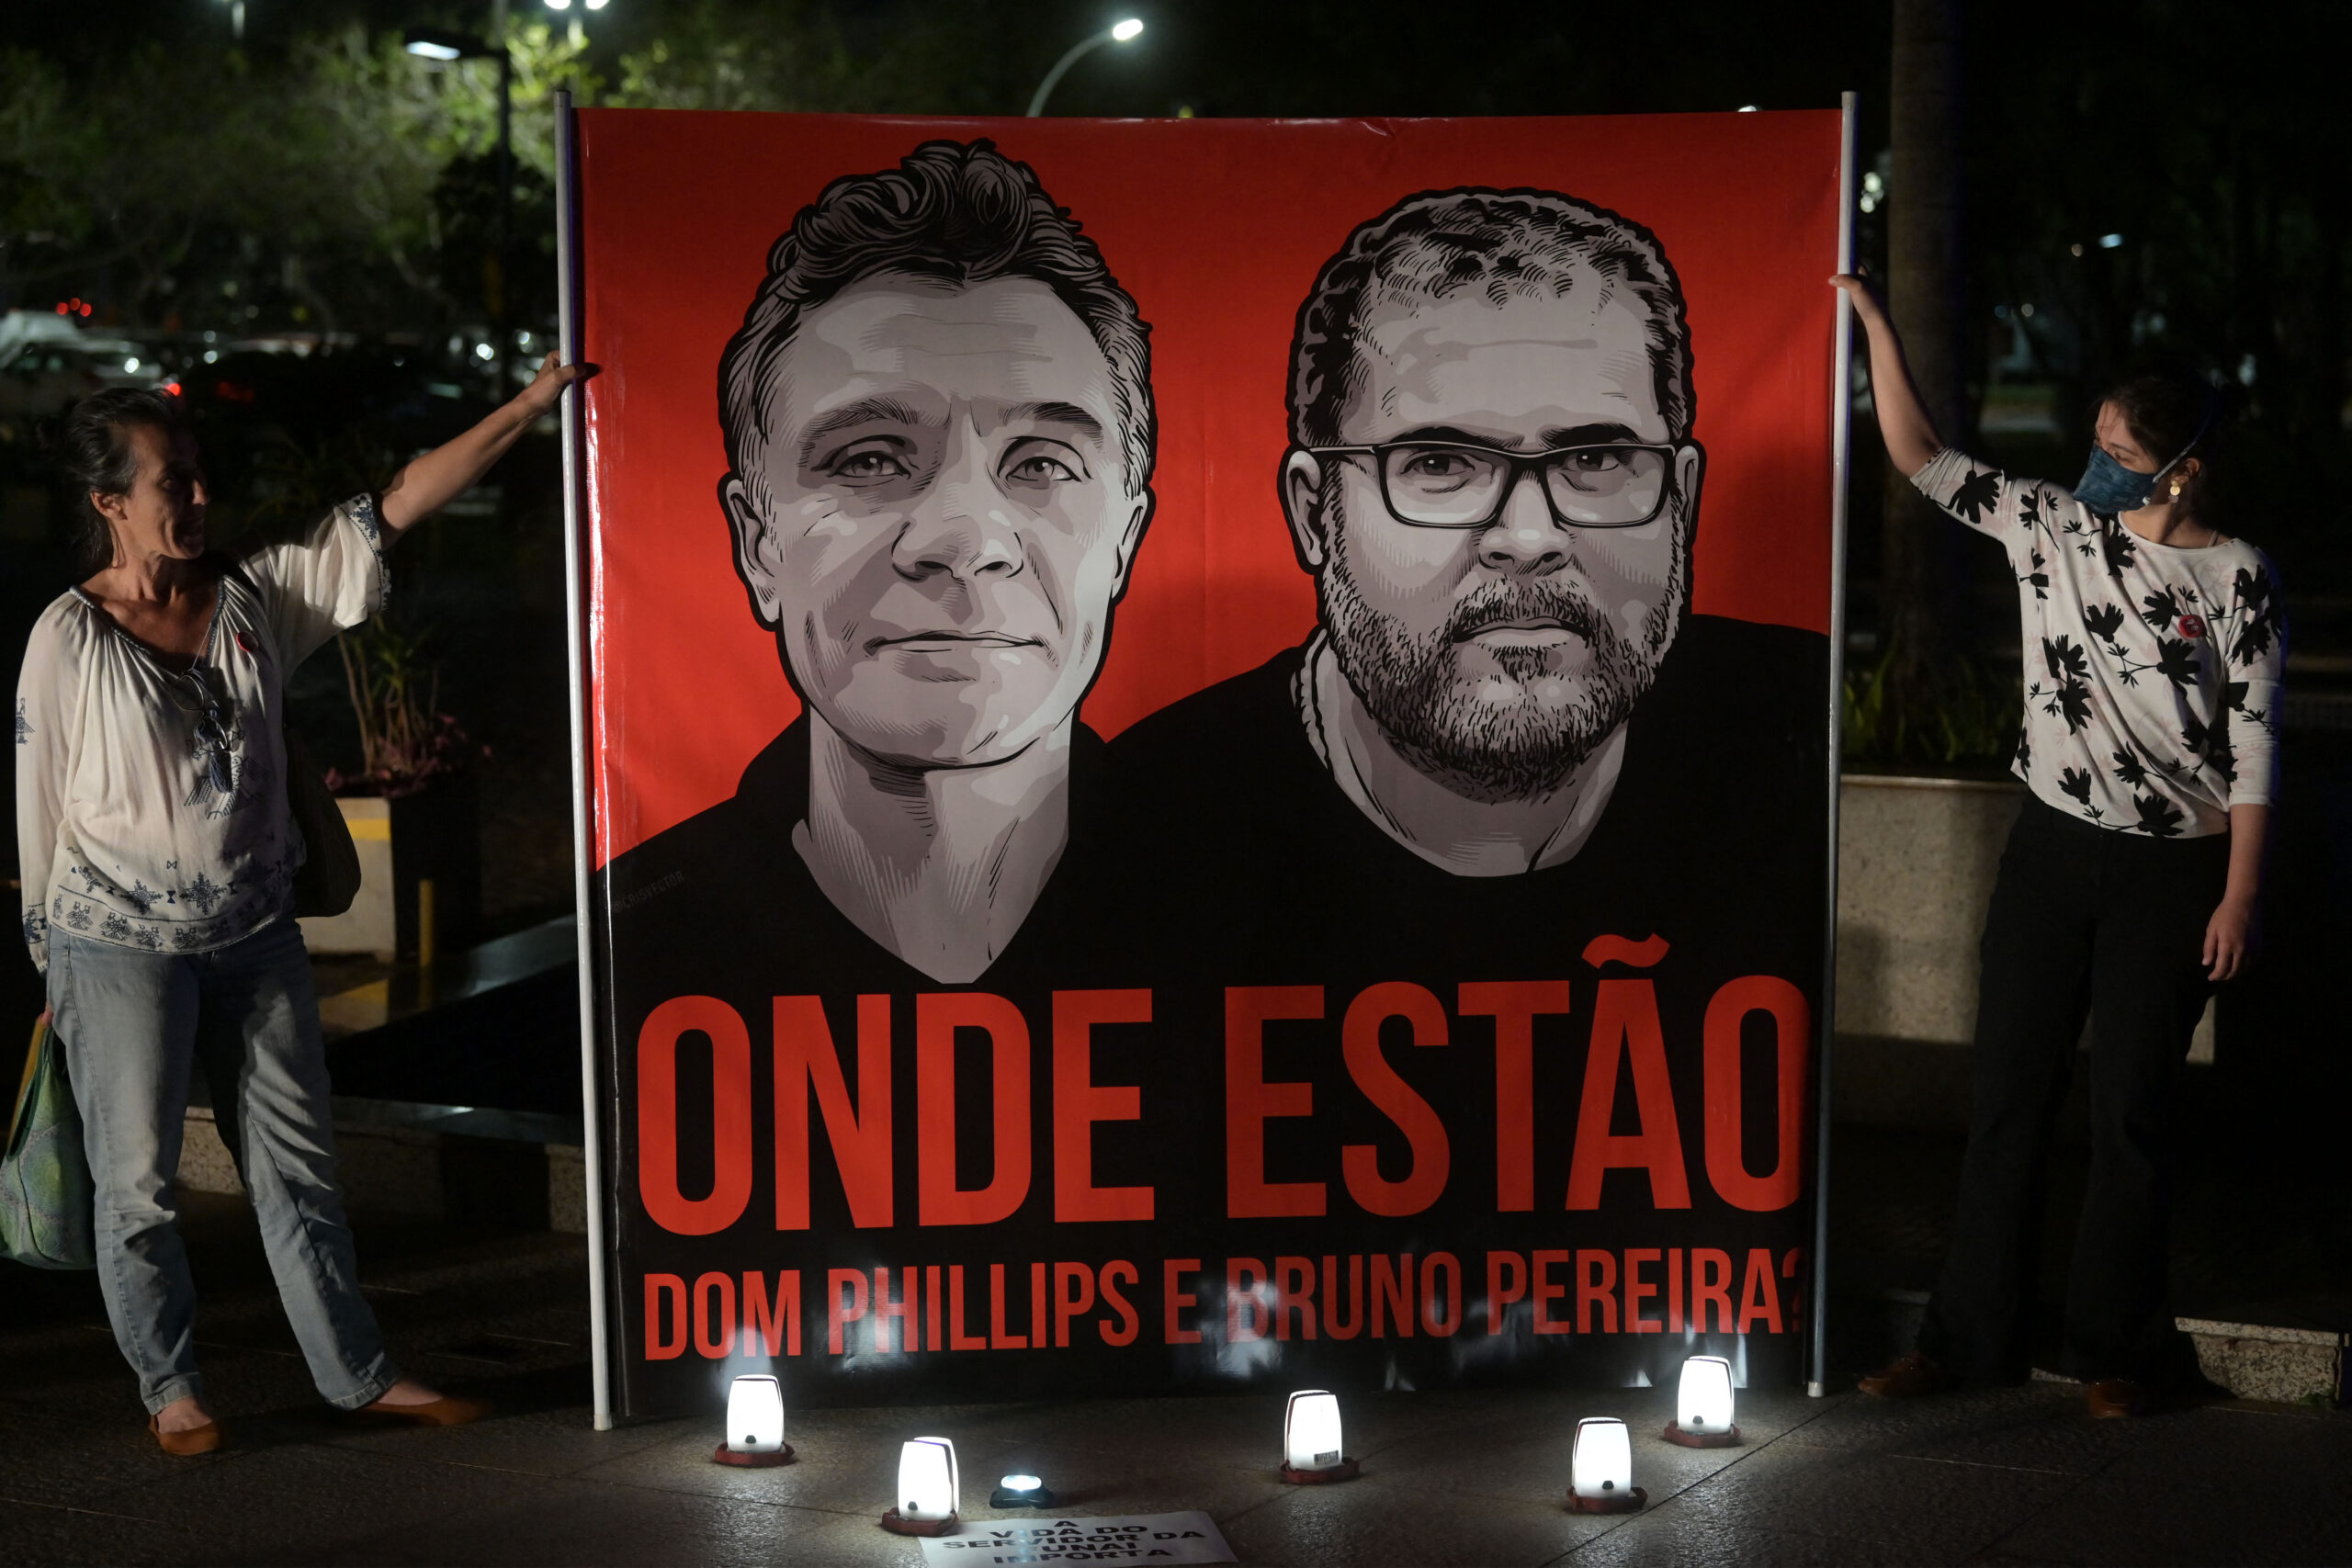 Brazil: Authorities must guarantee transparency and respect for human rights in search for Dom Phillips and Bruno Pereira